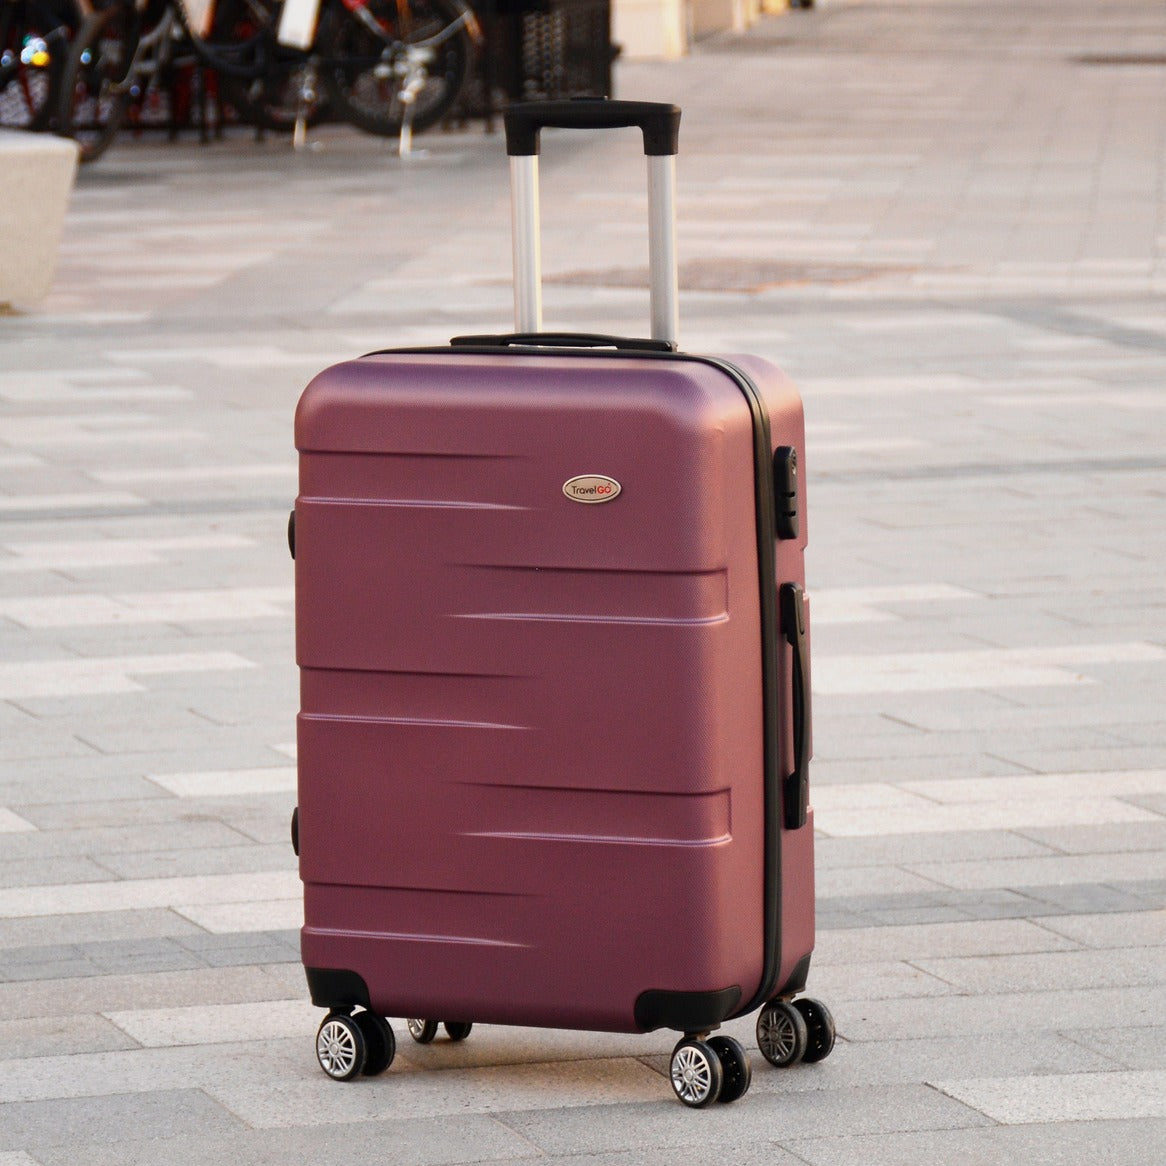 28" Purplish Red Colour JIAN ABS 559 Luggage Lightweight Hard Case Trolley Bag with Spinner Wheel